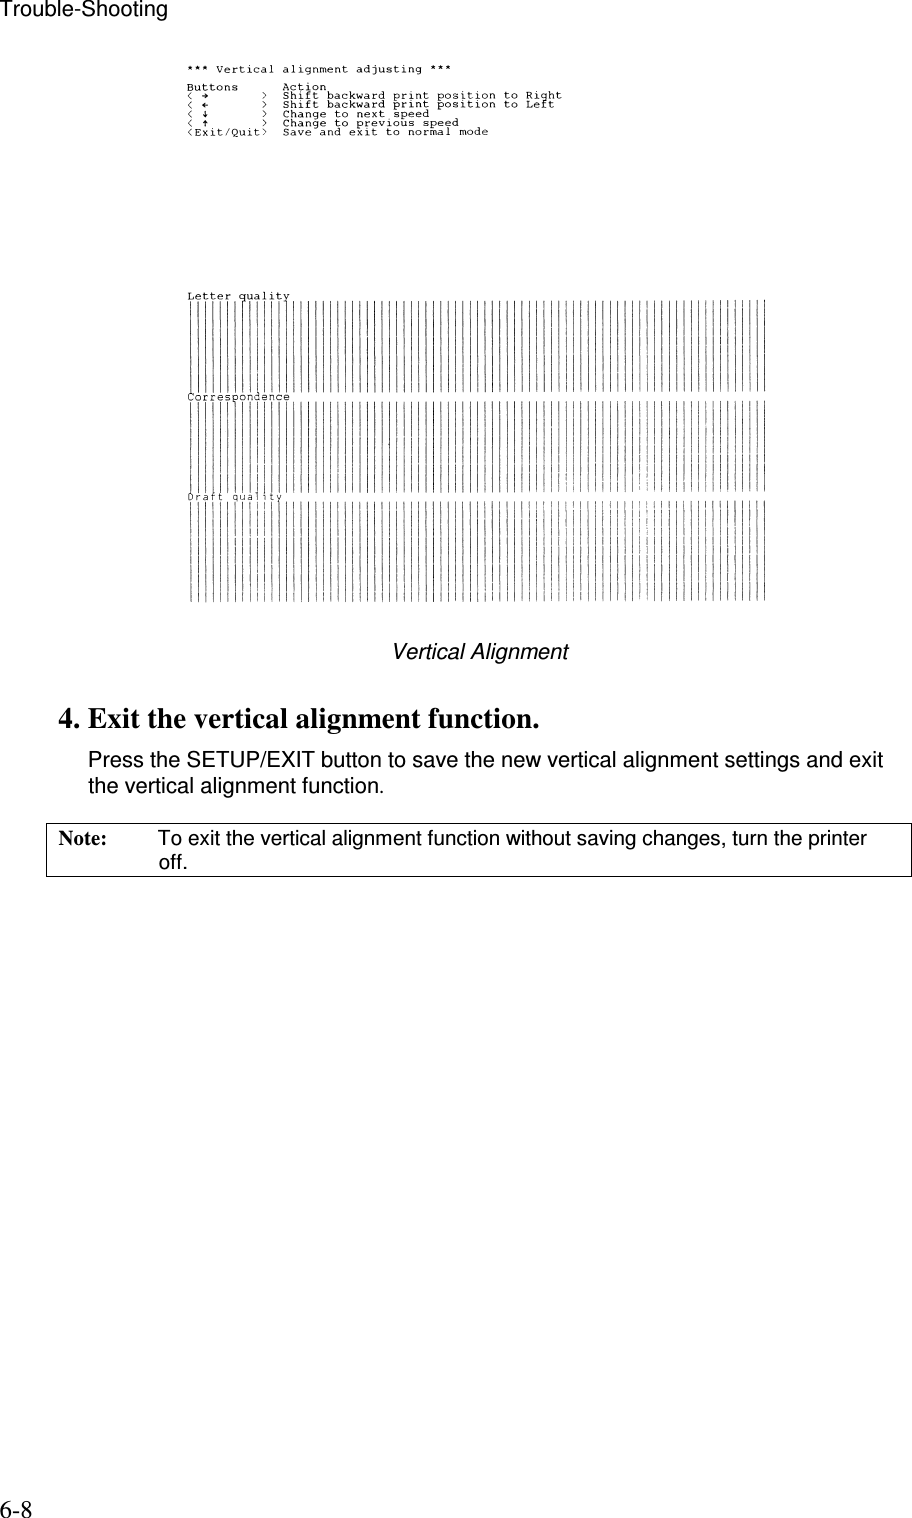 Trouble-Shooting  6-8  Vertical Alignment 4. Exit the vertical alignment function.  Press the SETUP/EXIT button to save the new vertical alignment settings and exit the vertical alignment function. Note:  To exit the vertical alignment function without saving changes, turn the printer off.  